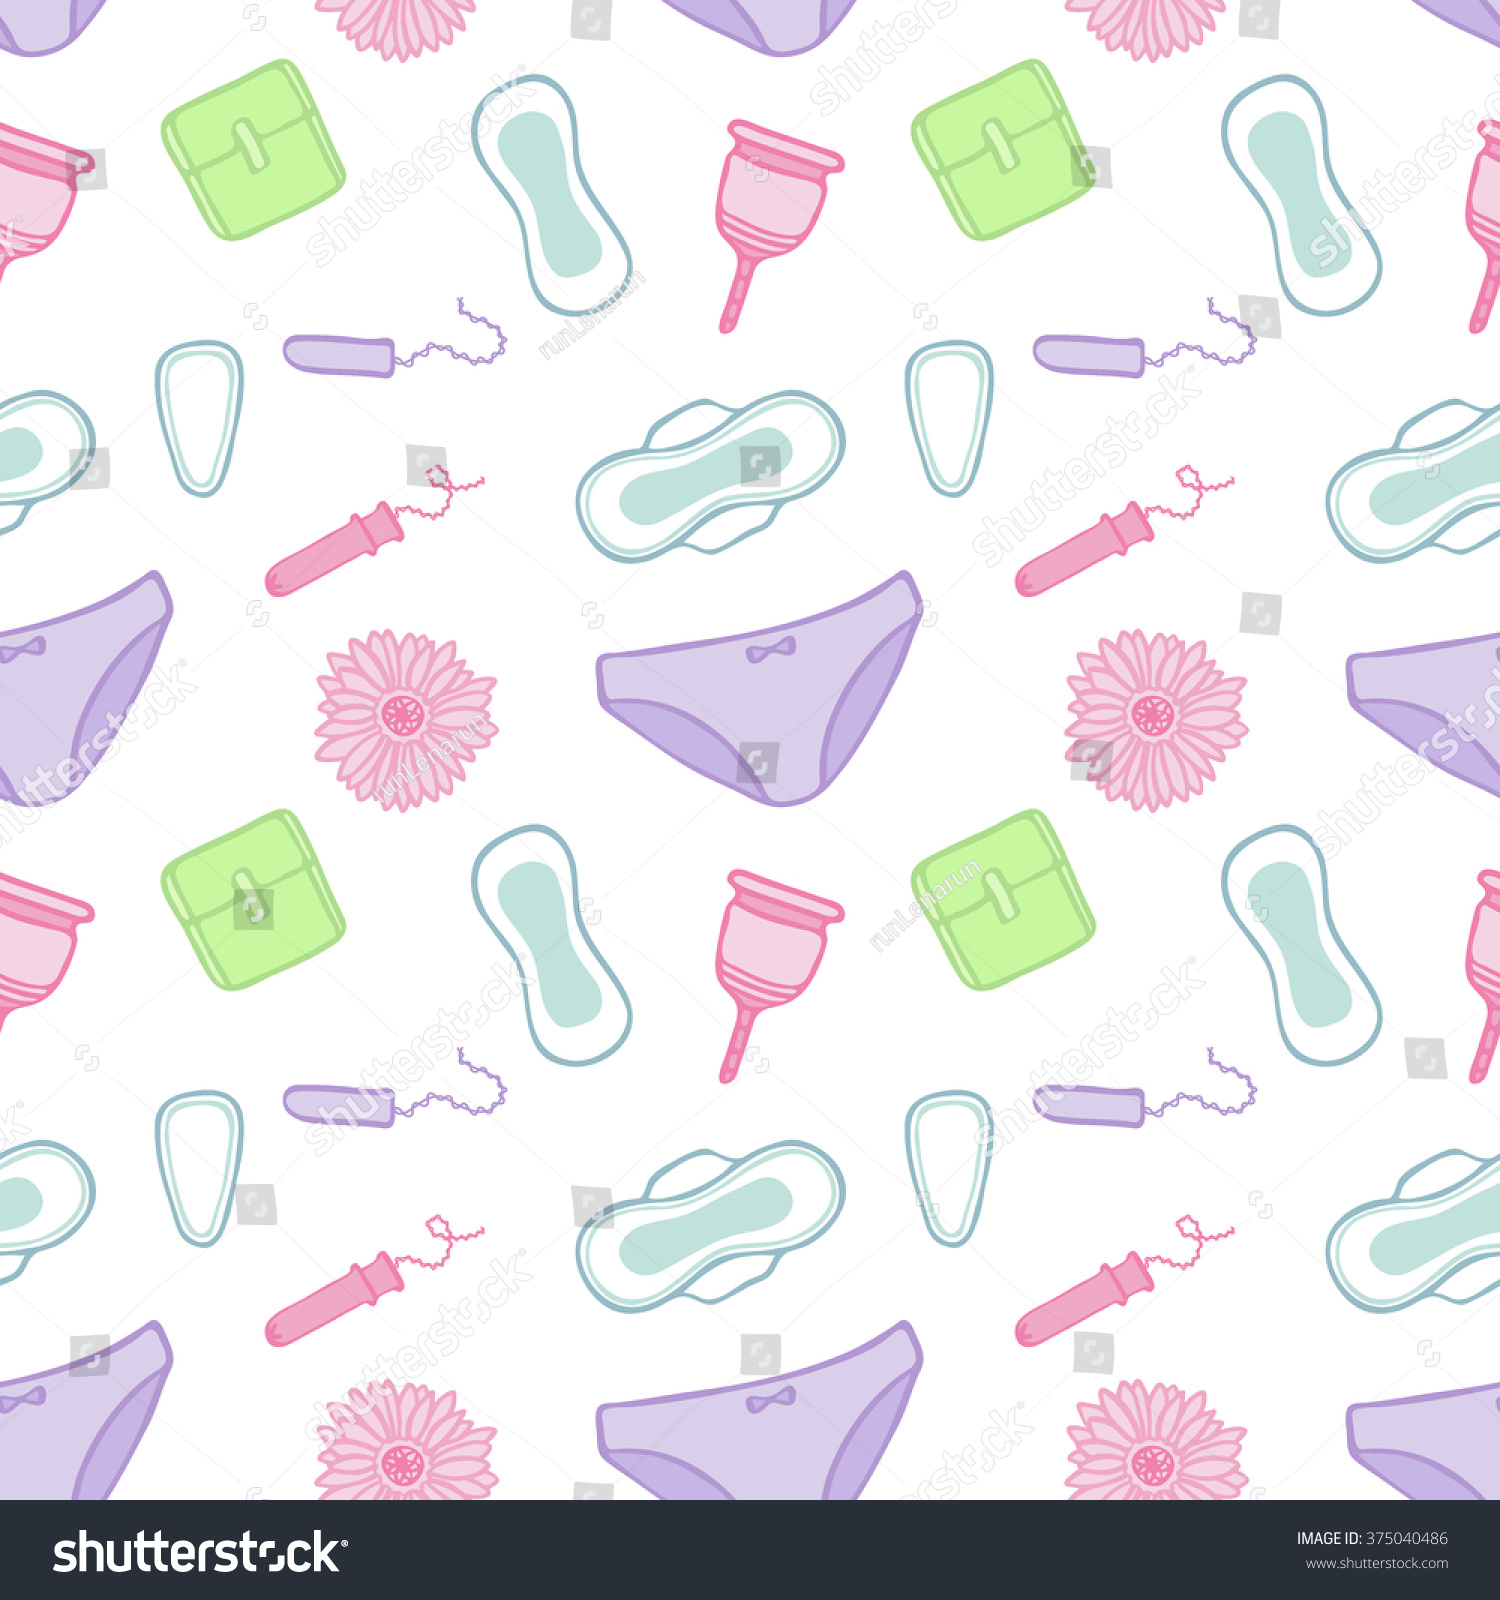 Feminine Hygiene Products Sketch Seamless Pattern With Hand Drawn Cartoon Icons Pad Tampon 9925